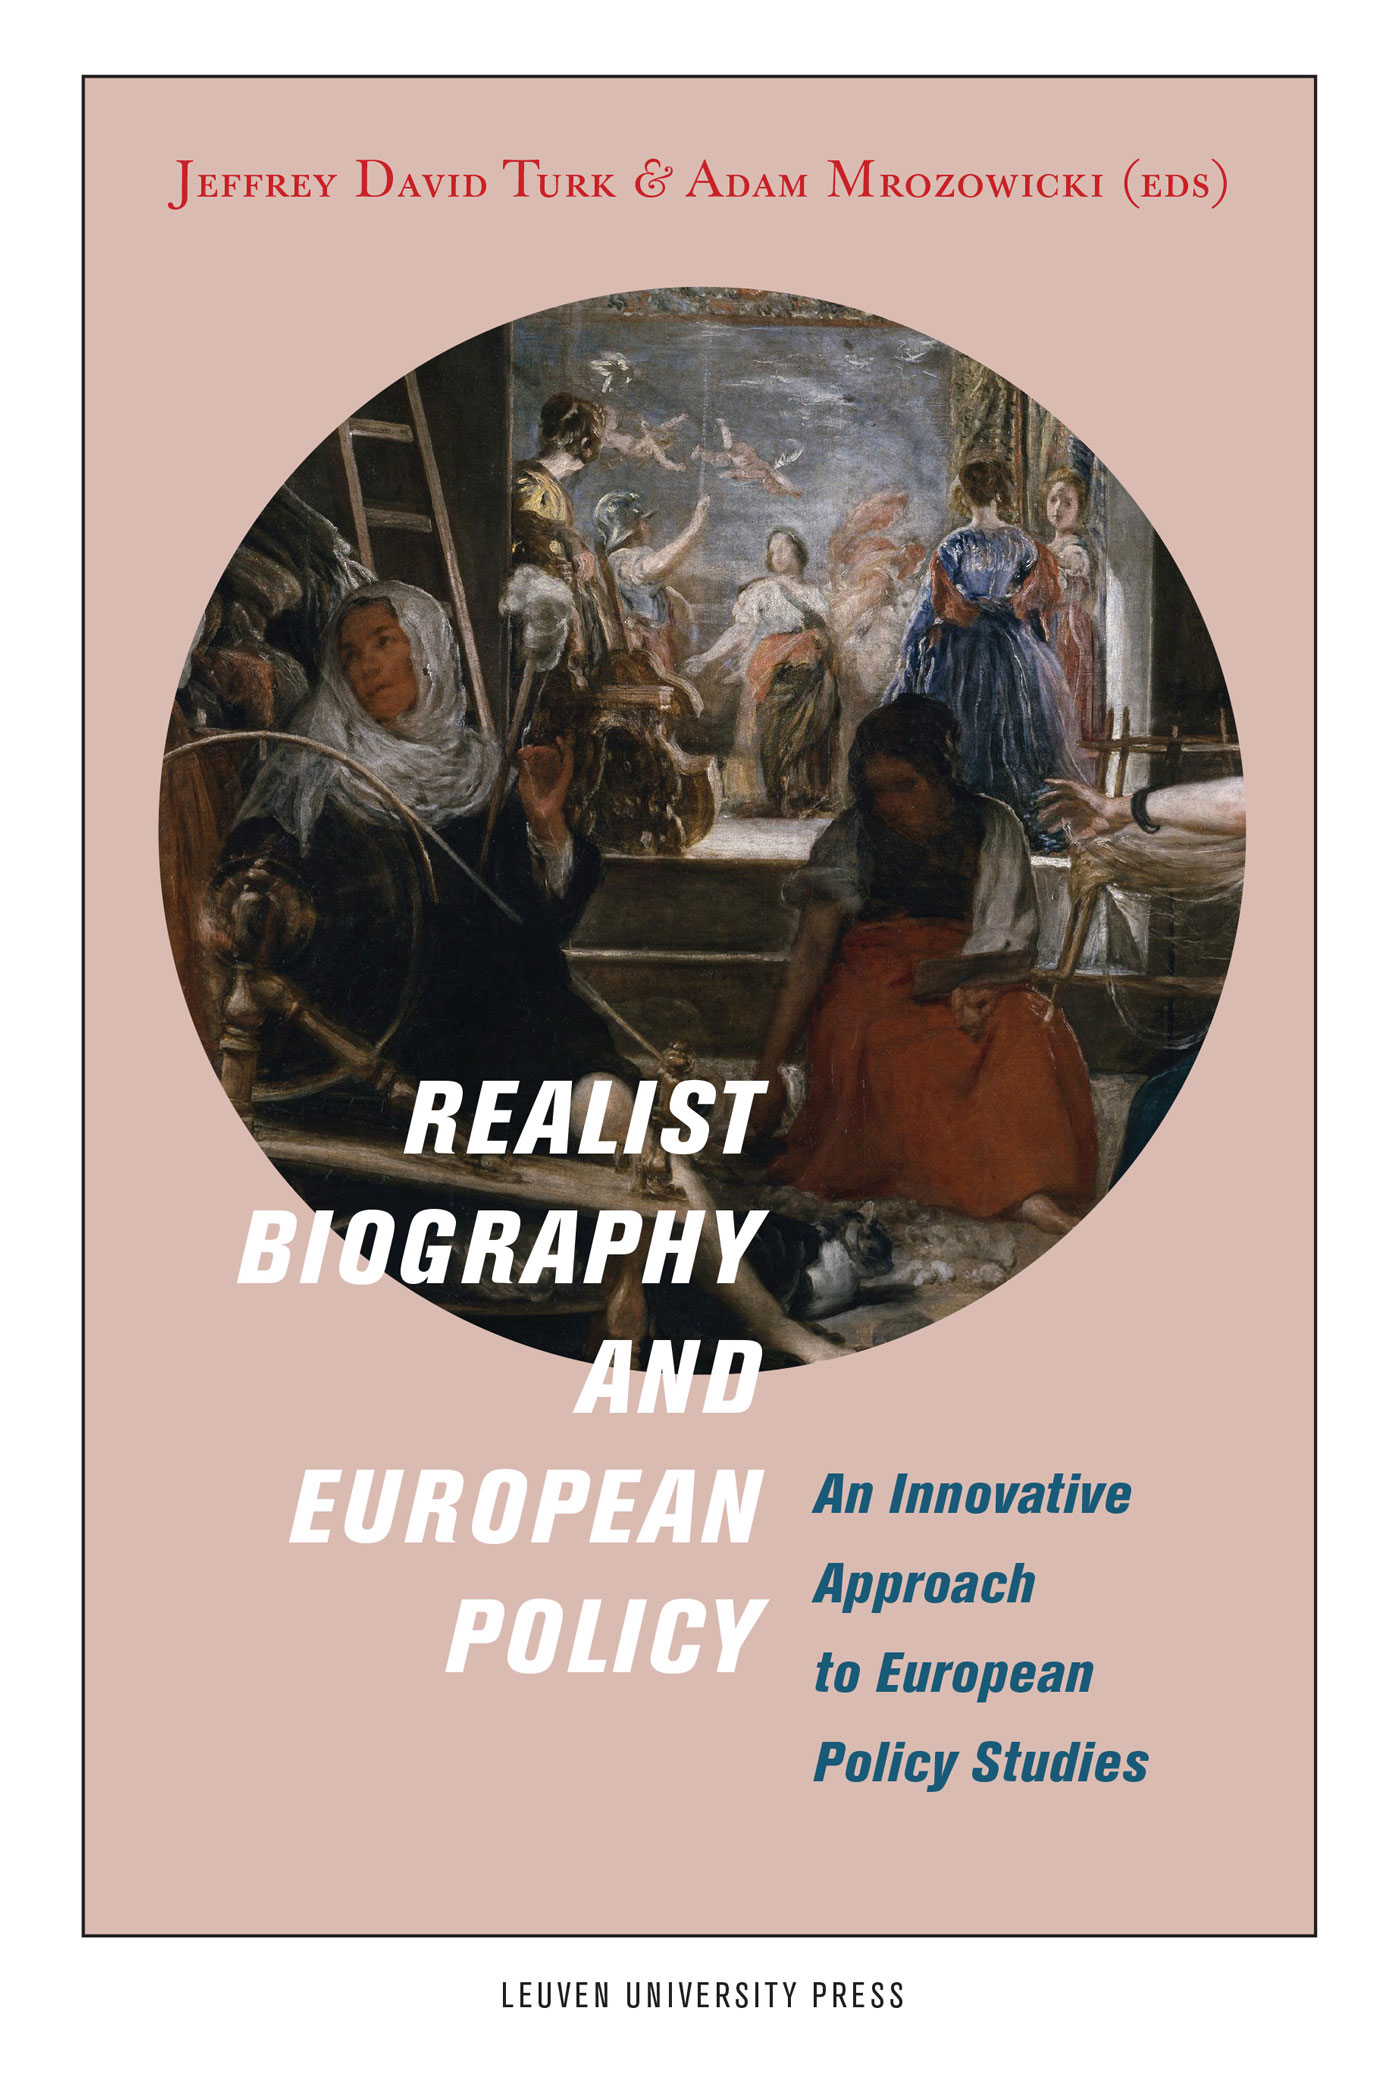 Realist biography and European policy (Ebook)